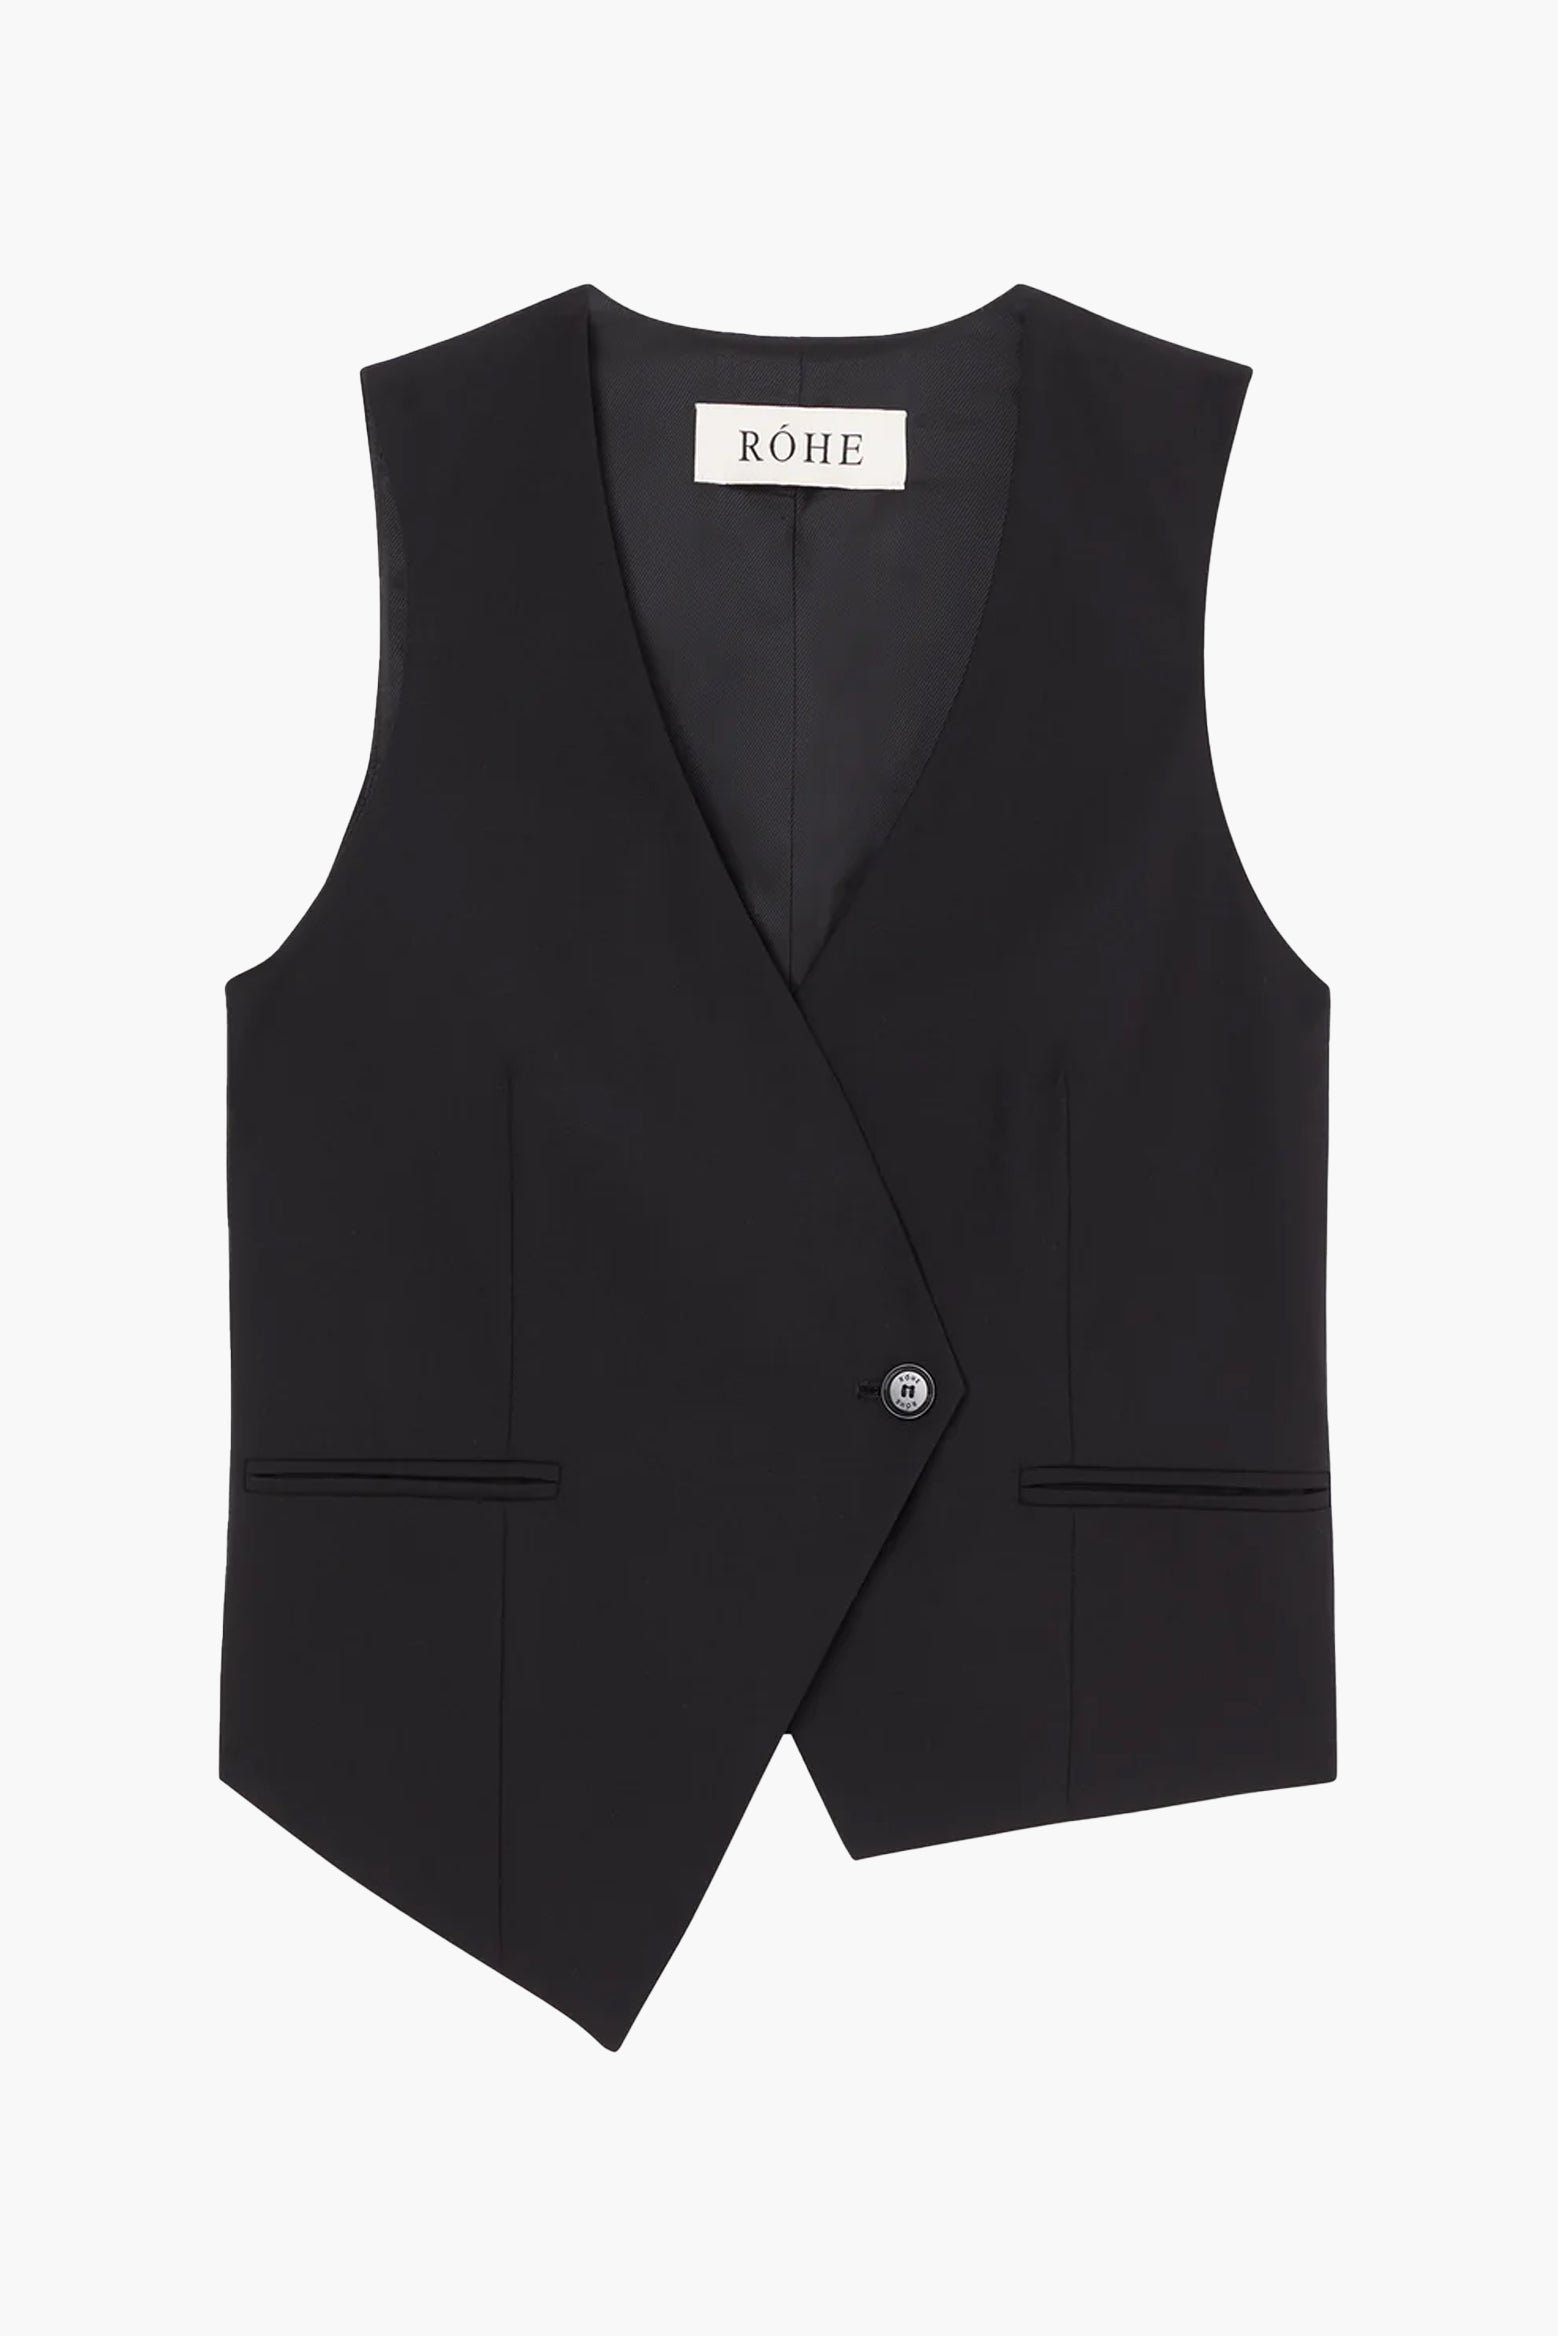 Rohe Tailored Overlap Waistcoat in Noir available at The New Trend Australia. 